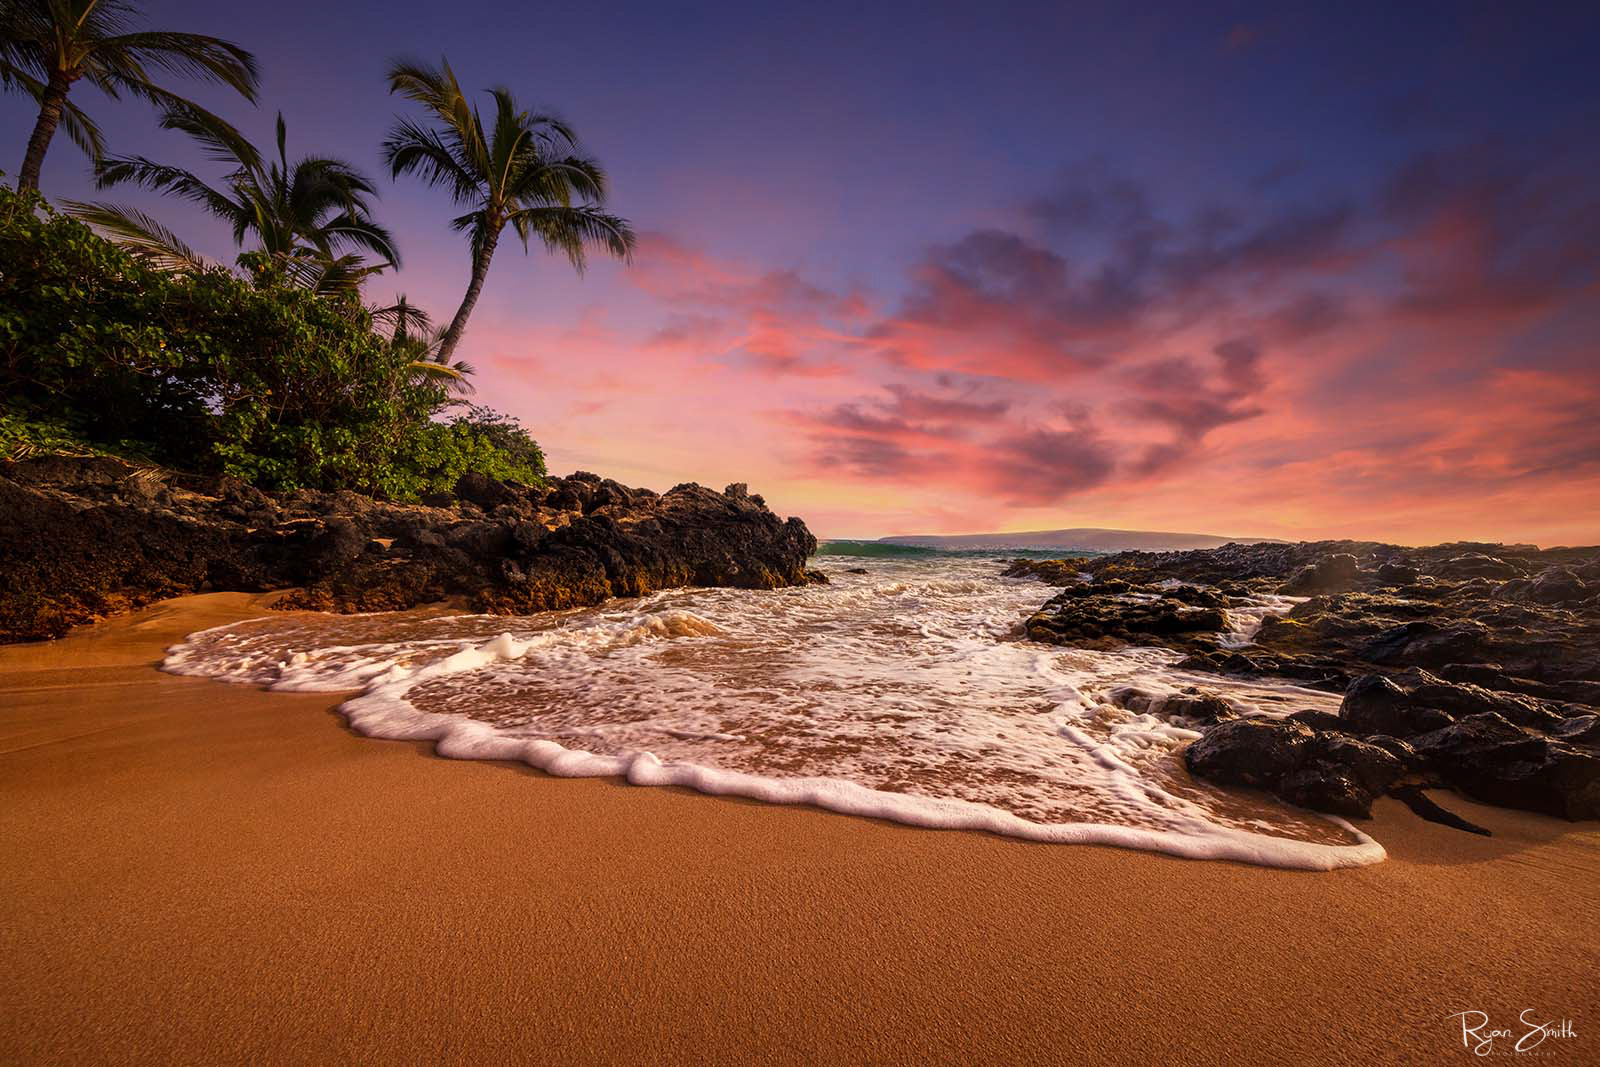 Sandy beach with volcanic rocks and palm trees at sunset as the sky is lit pink and the foamy white waves come in to kiss the shore. 